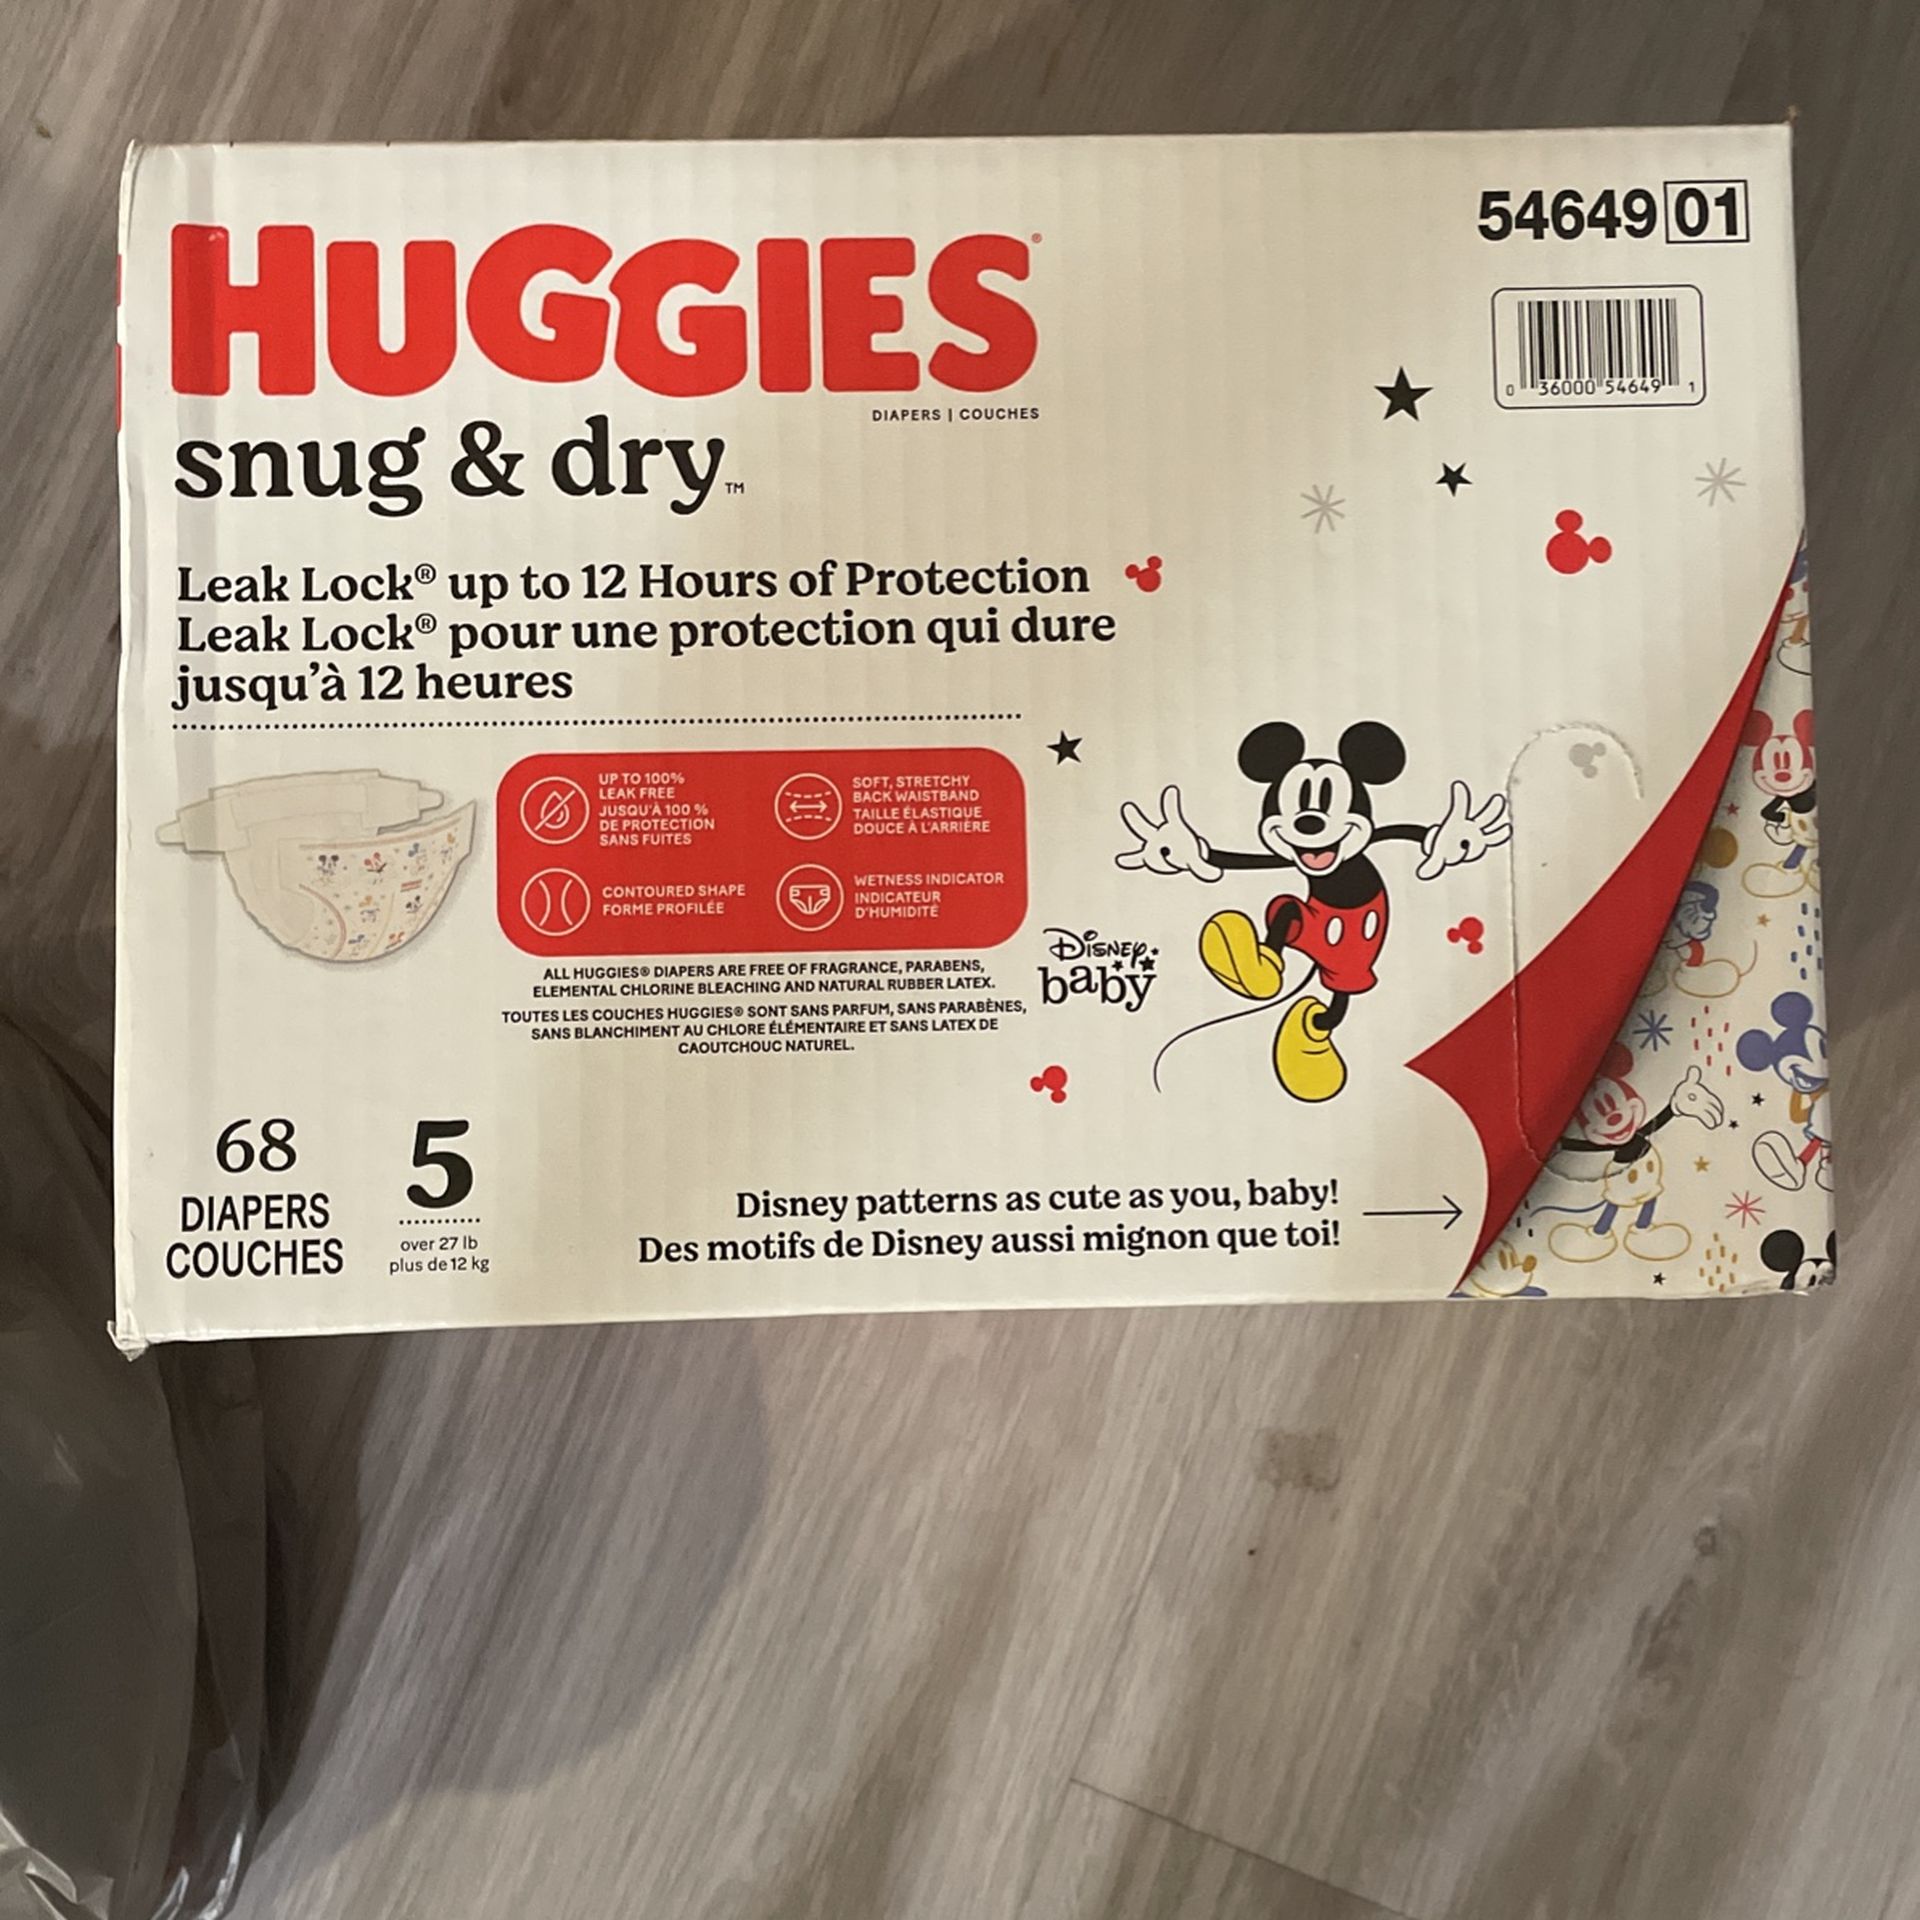 Súper 📦 Package 📦 1 Box Huggies Snug Dry  Diapers. And 1 Box Huggies Natural Care Wipes 